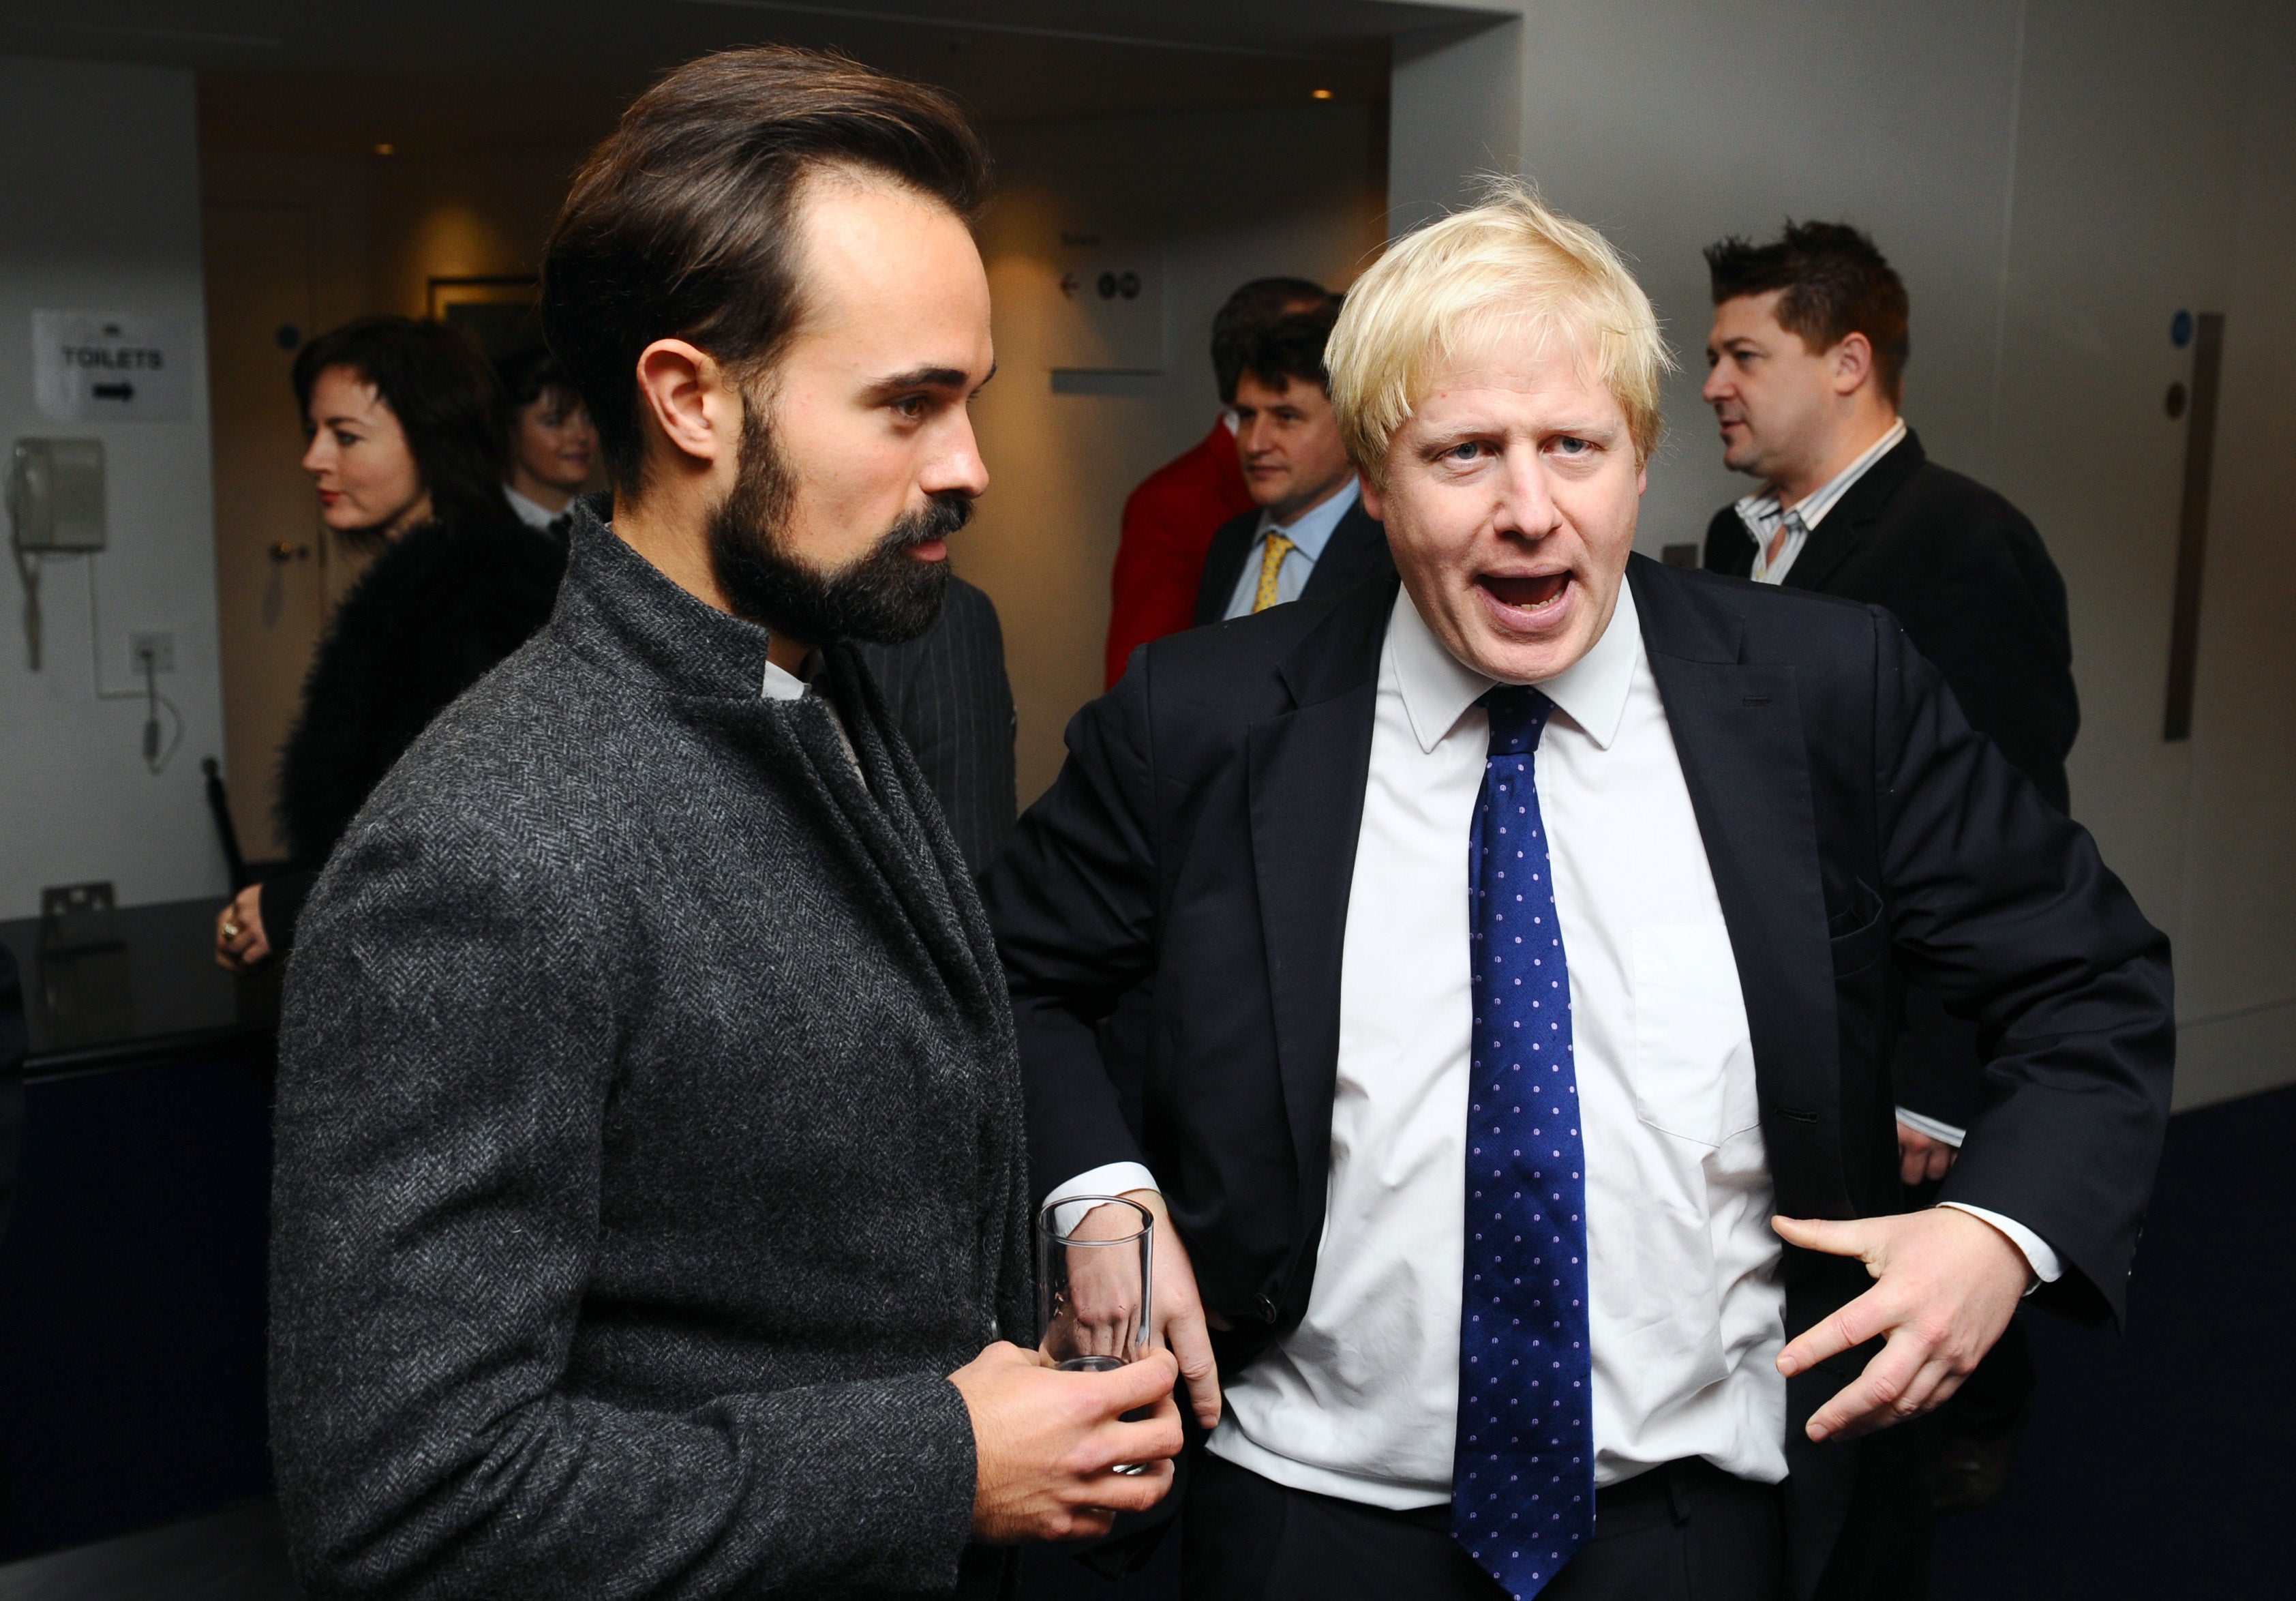 Evgeny Lebedev and Boris Johnson attend a pre-lunch reception for the Evening Standard Theatre Awards at the Royal Opera House in Covent Garden, London, in 2009 (Ian West/PA)